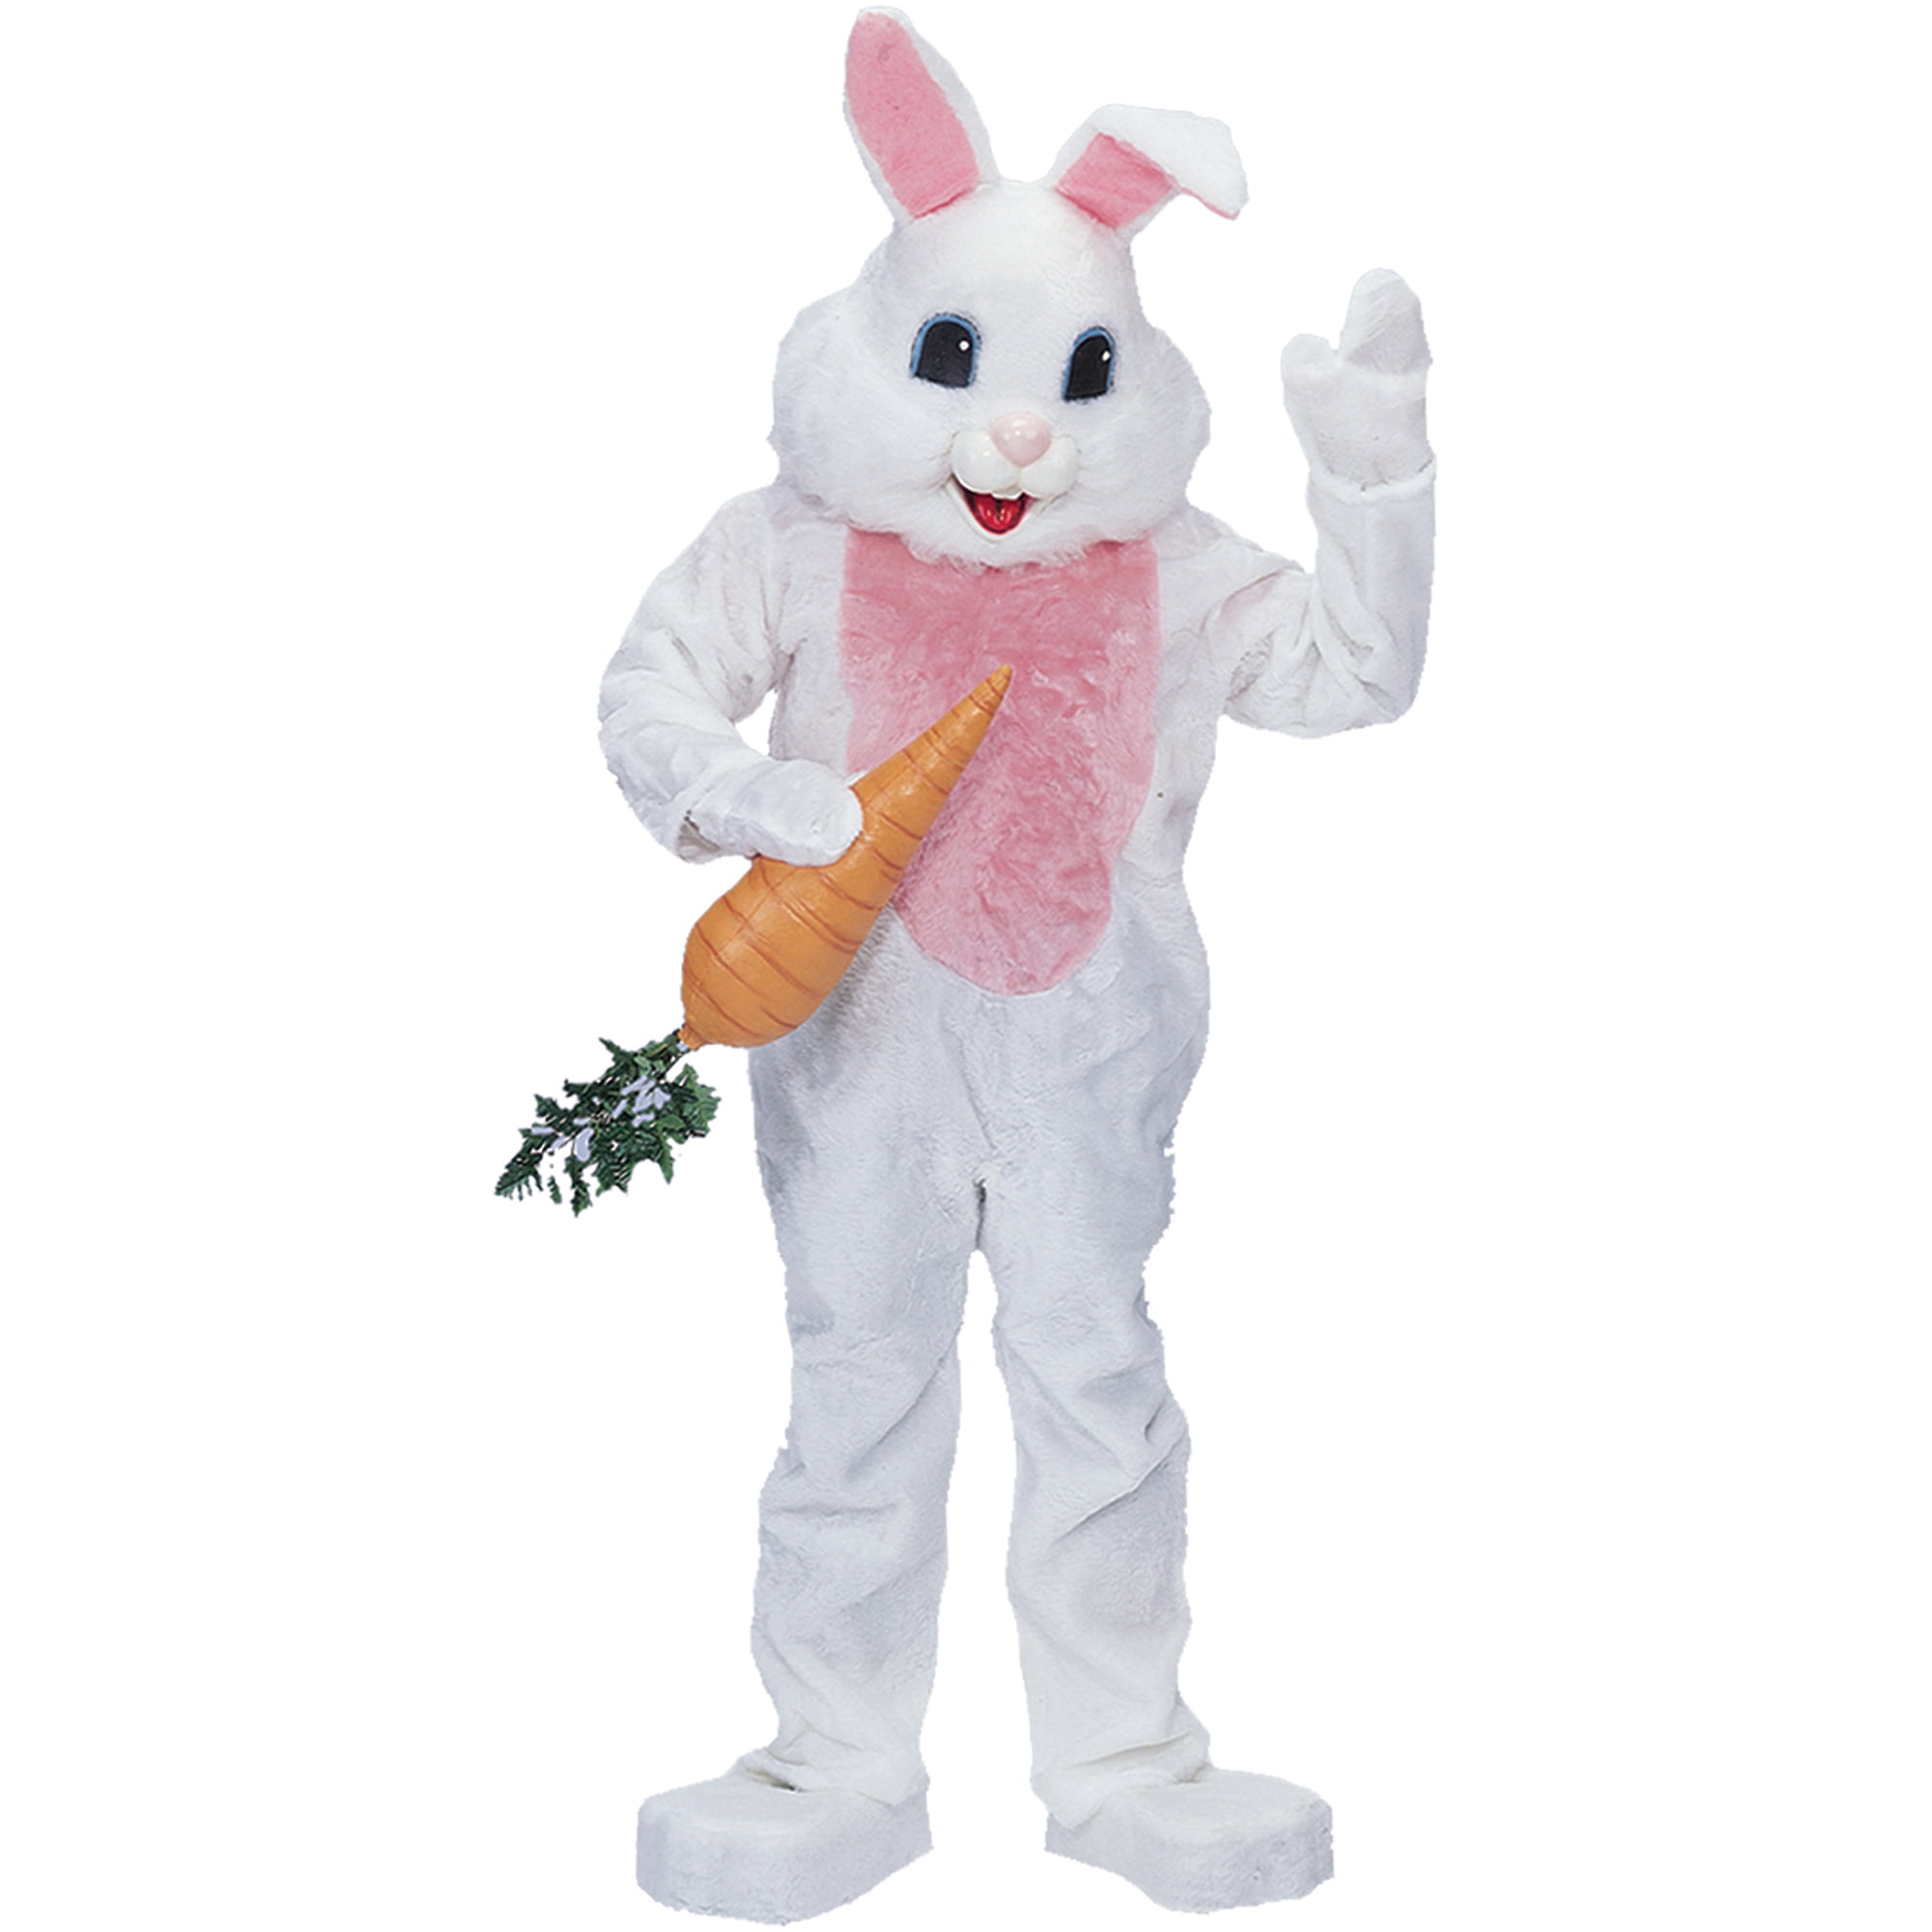 2019 Easter Bunny Mascot Costume Rabbit Cartoon Dress Adult Size Only Clothing 